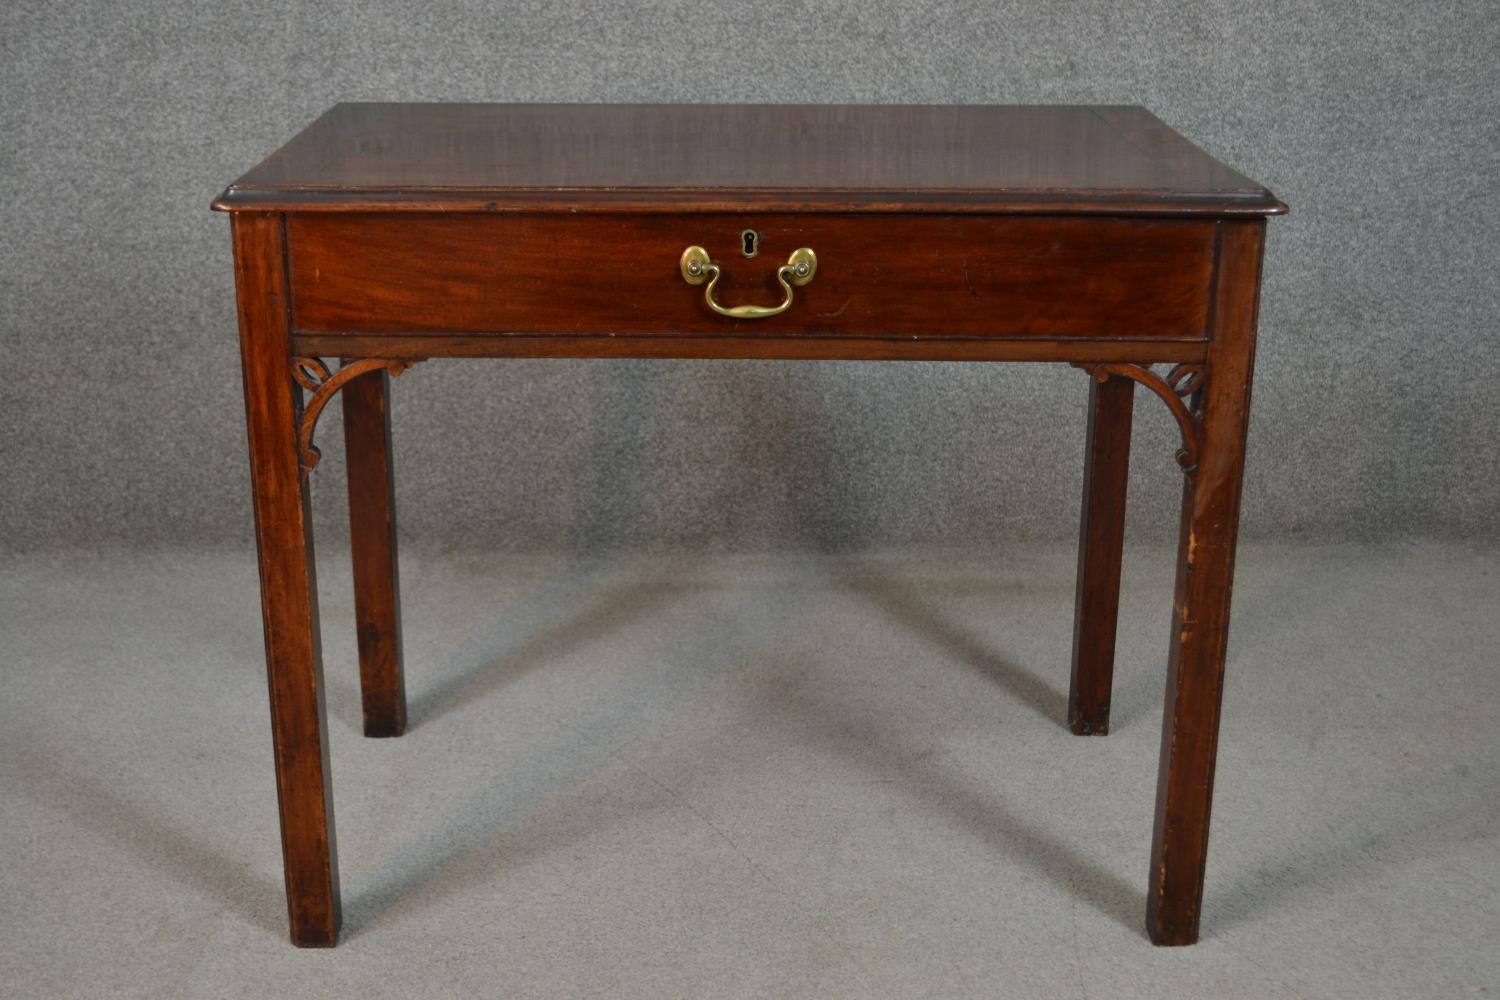 A George III late 18th century mahogany architect's table, with a rectangular top, rising to